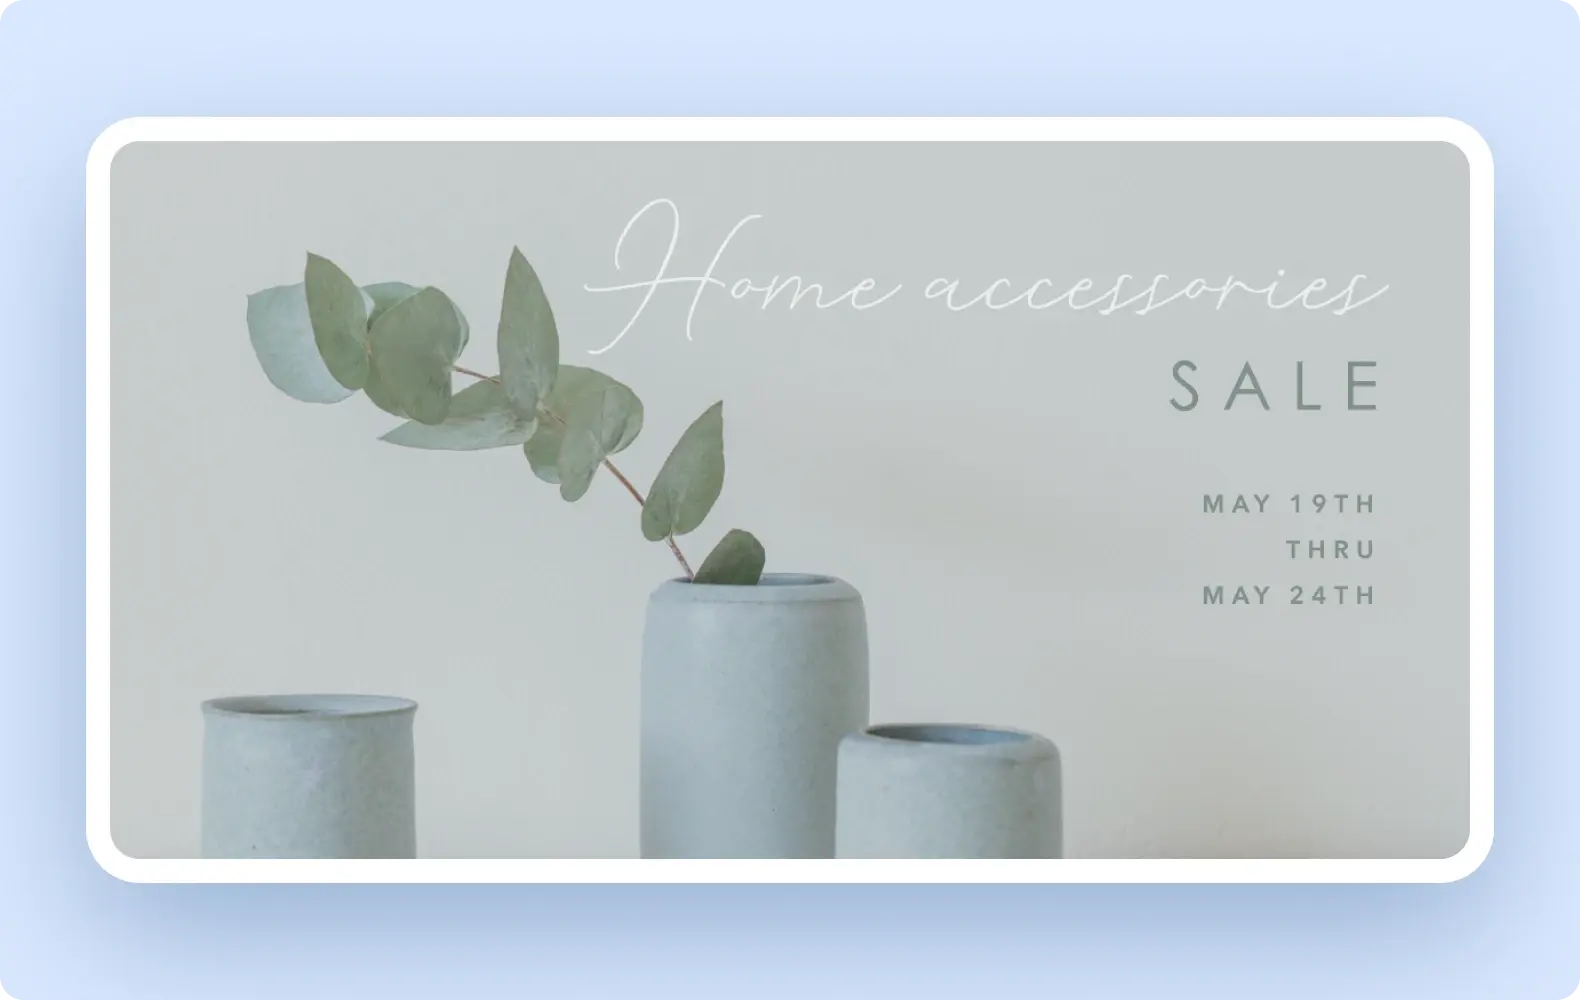 Example of an advertisement with one very clear message about a home accessories sale and specific dates.